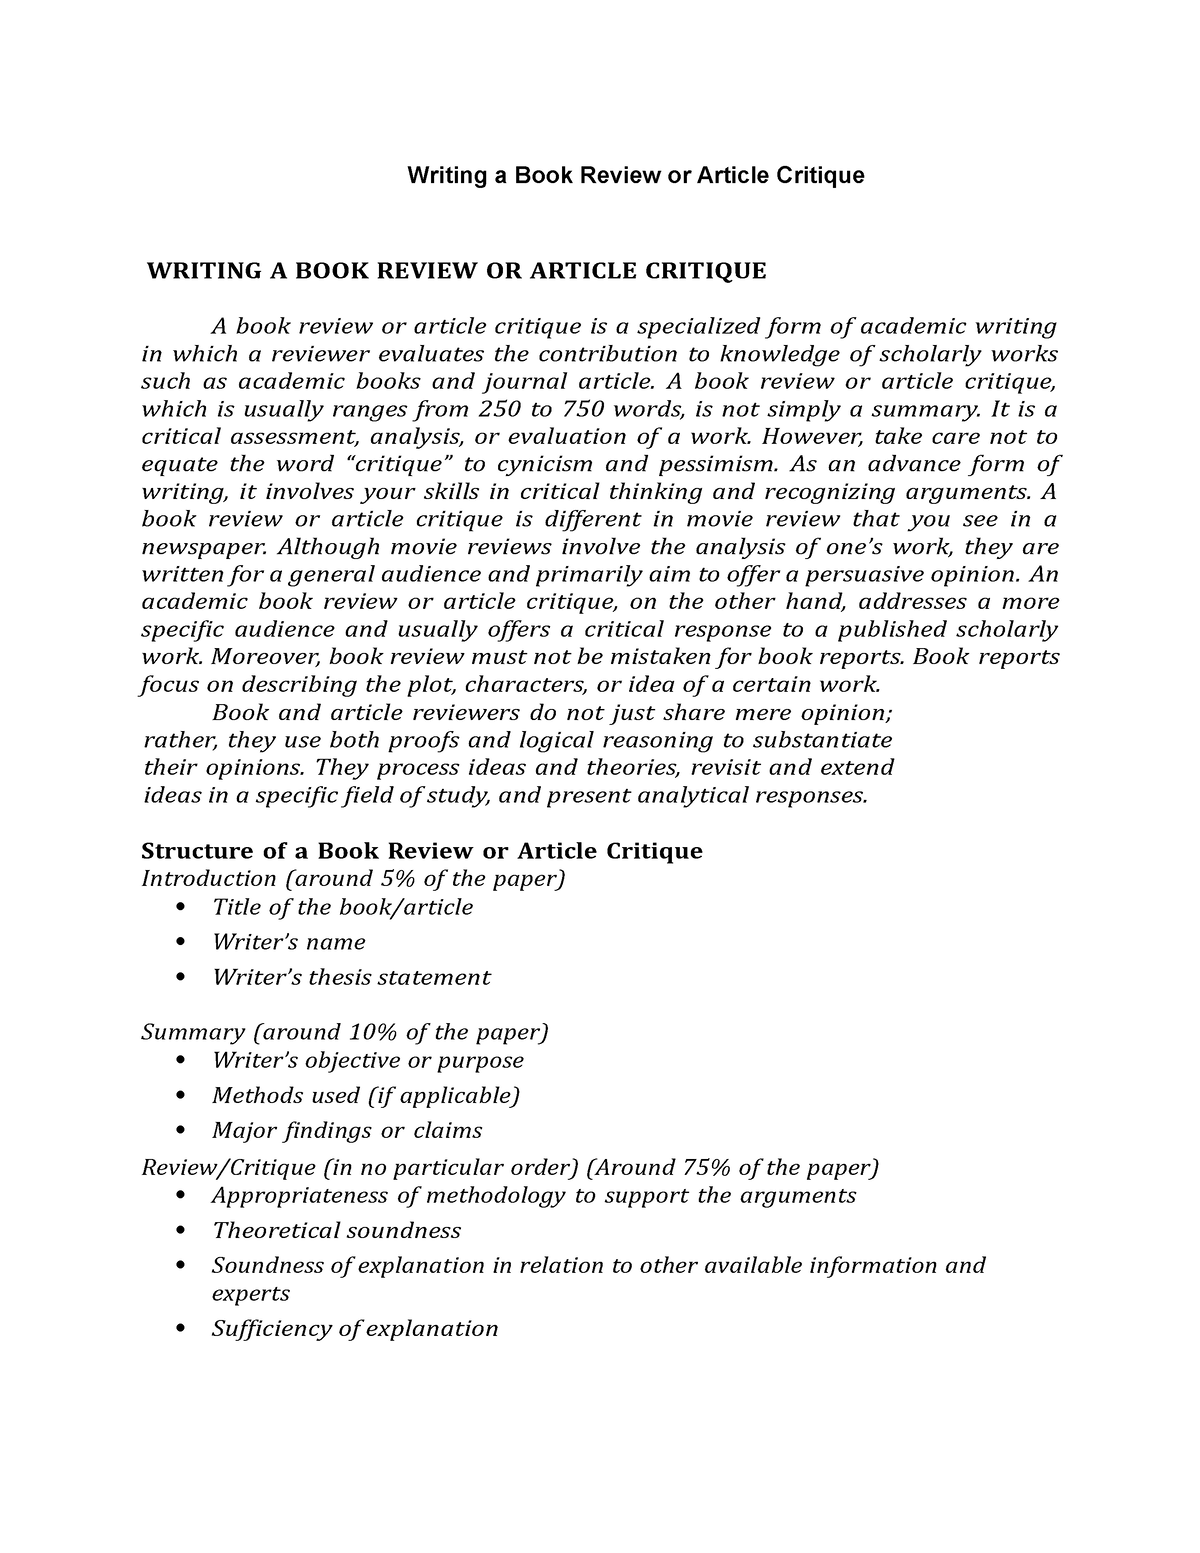 Chapter 6 Writing A Book Review Or Article Critique Writing A Book Review Or Article